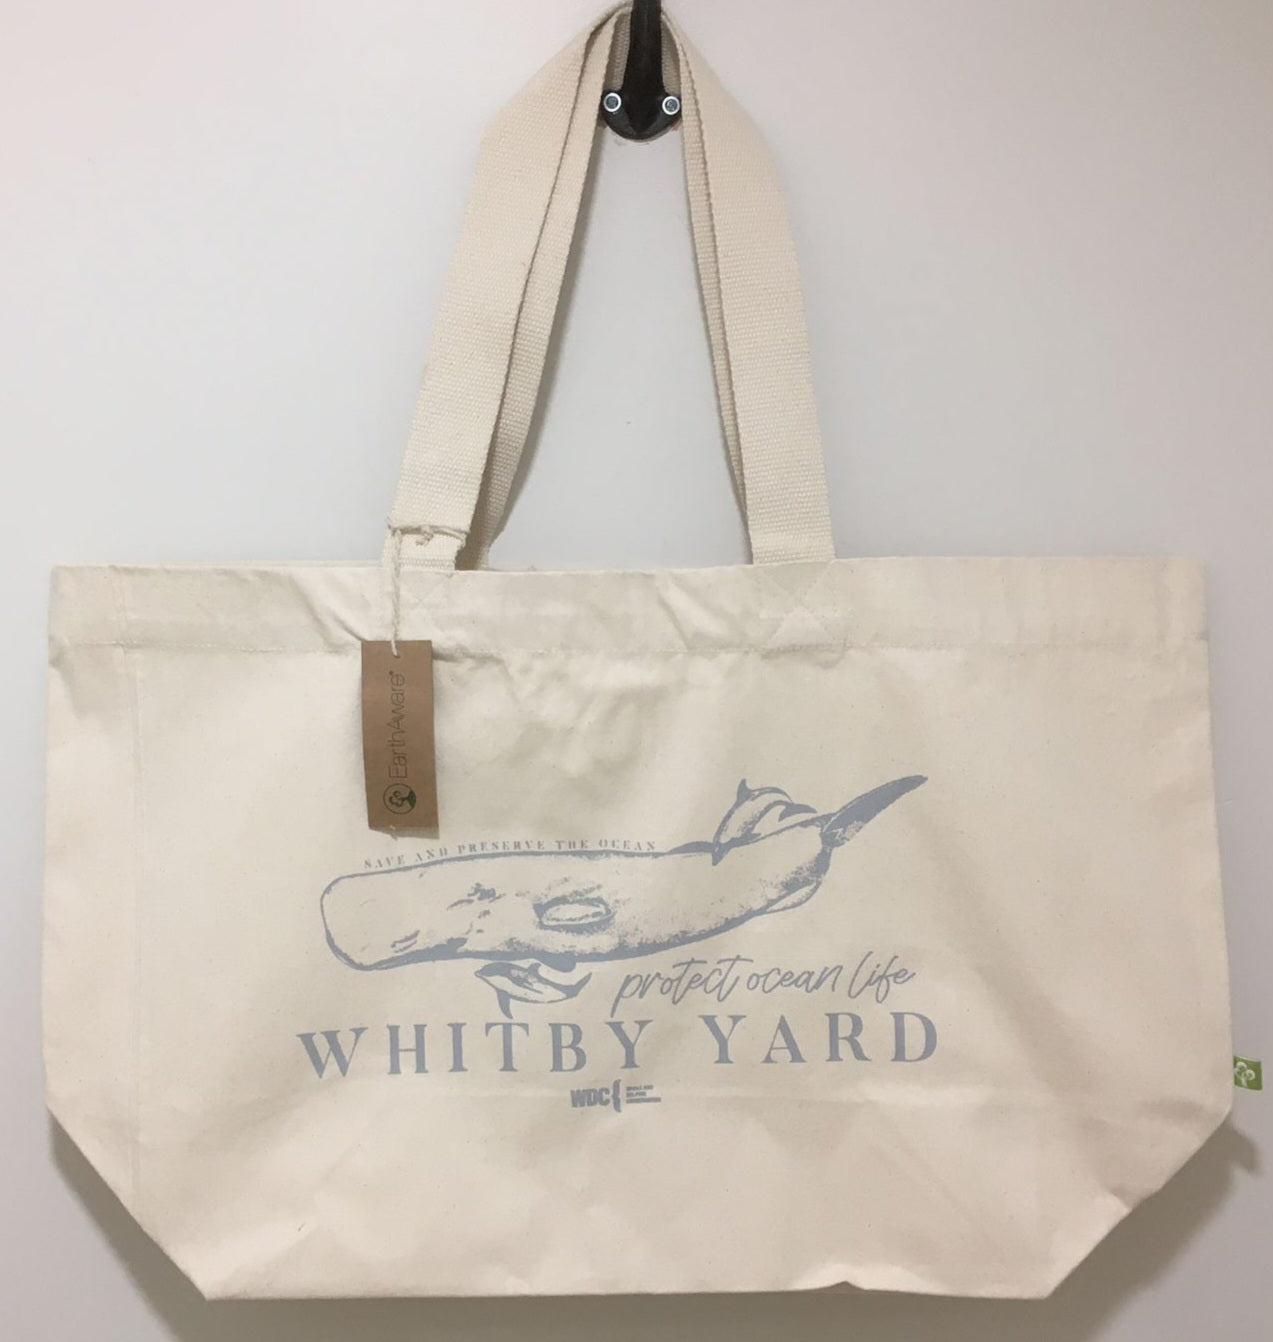 Whitby Yard ‘Whale & Dolphin Conservation’ design Organic Cotton Shopping Bag